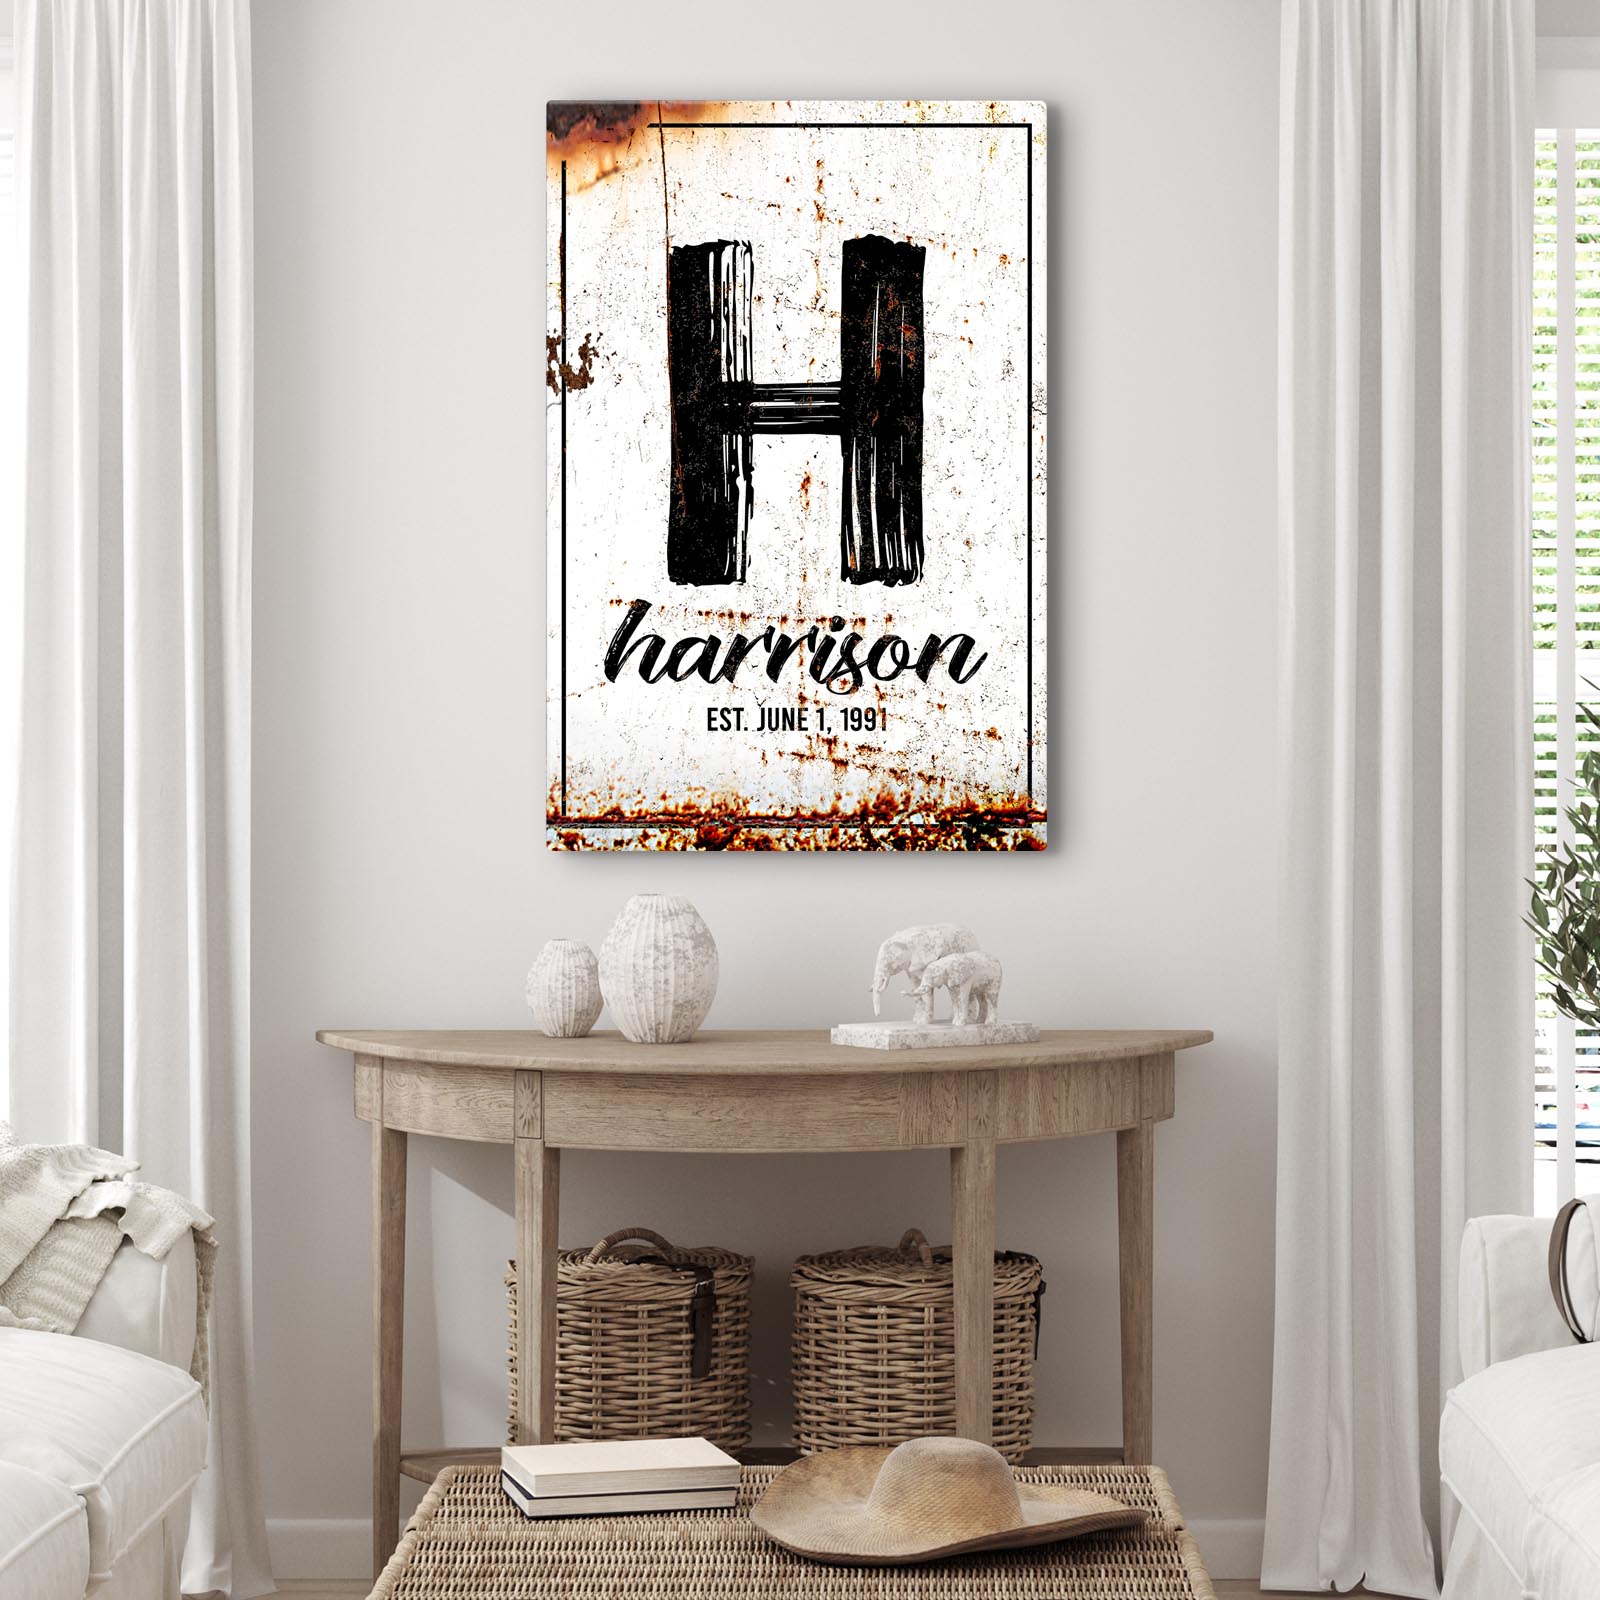 Family Name Portrait Sign - Image by Tailored Canvases